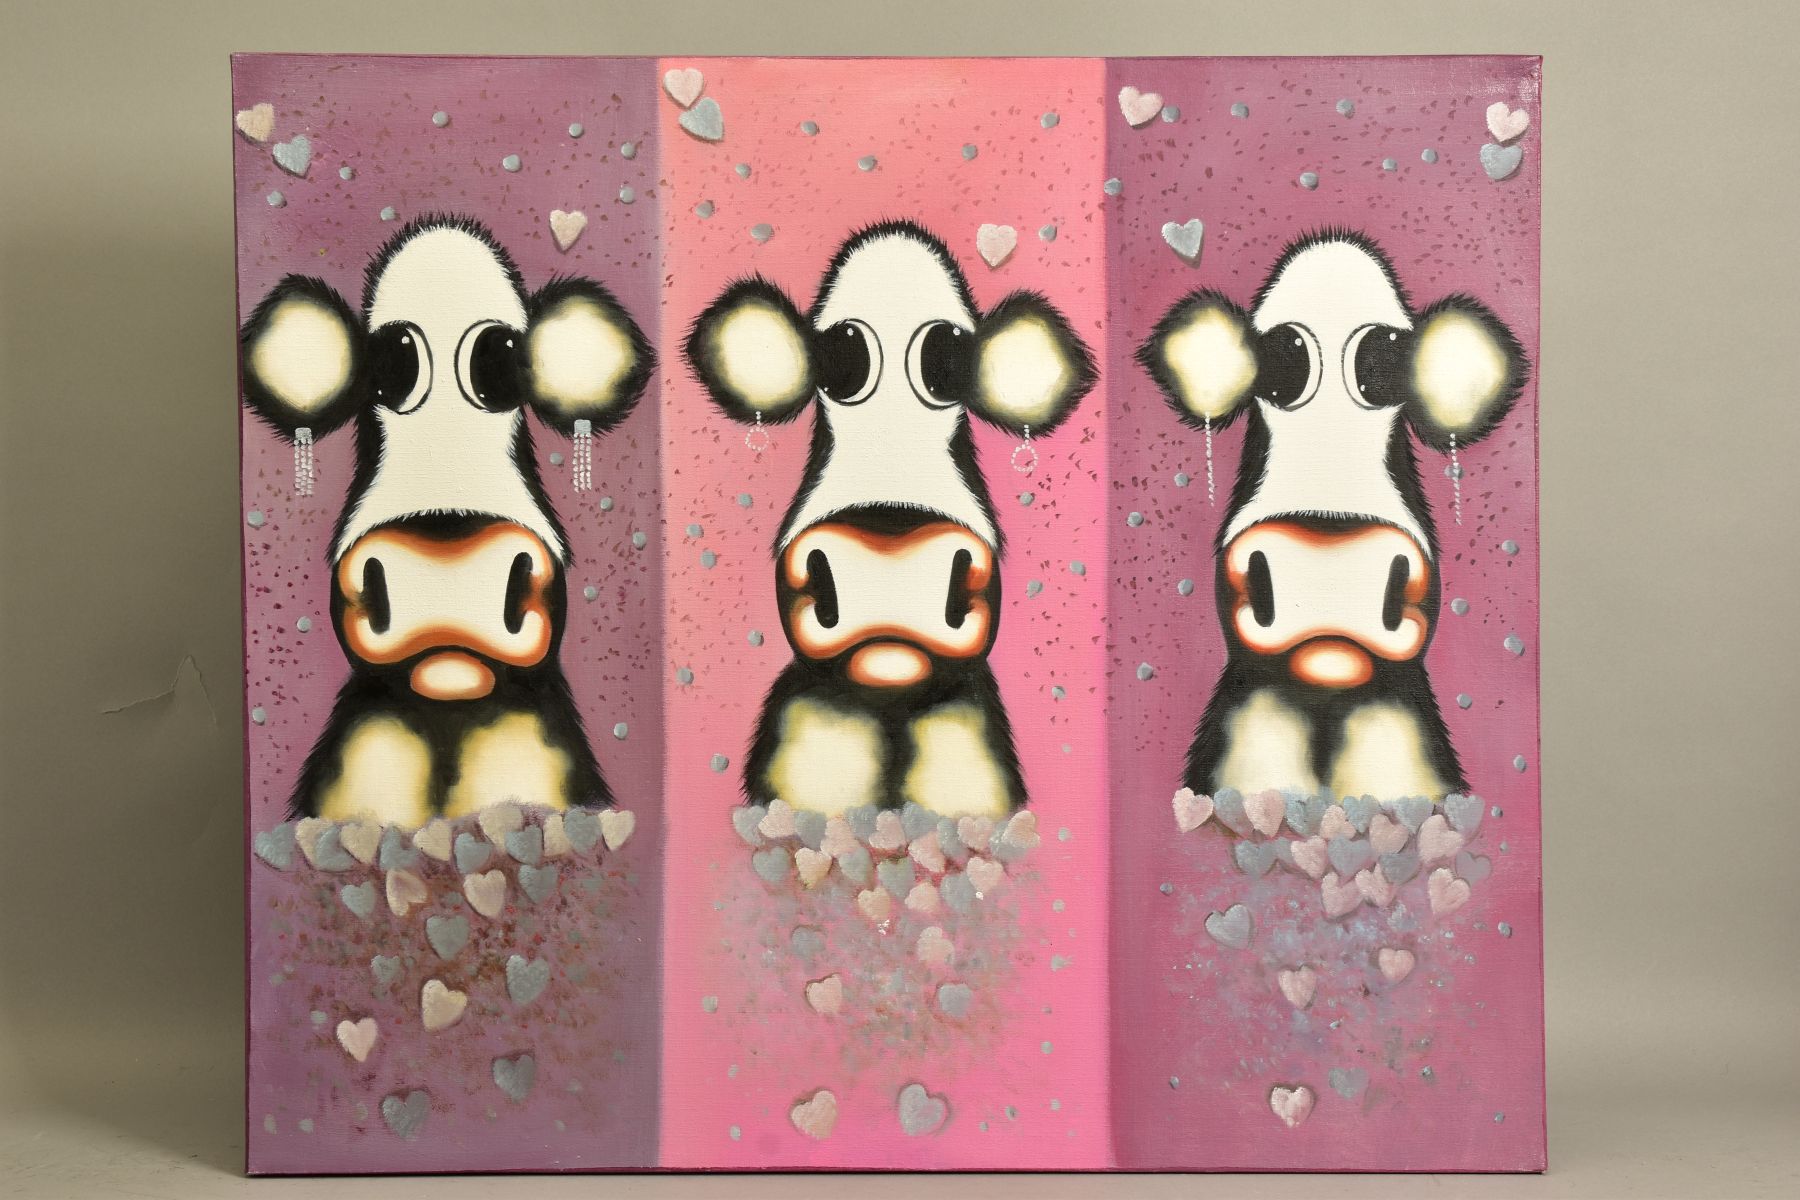 IN THE STYLE OF CAROLINE SHOTTON (BRITISH 1973) three quirky cows wearing earrings, unsigned, oil on